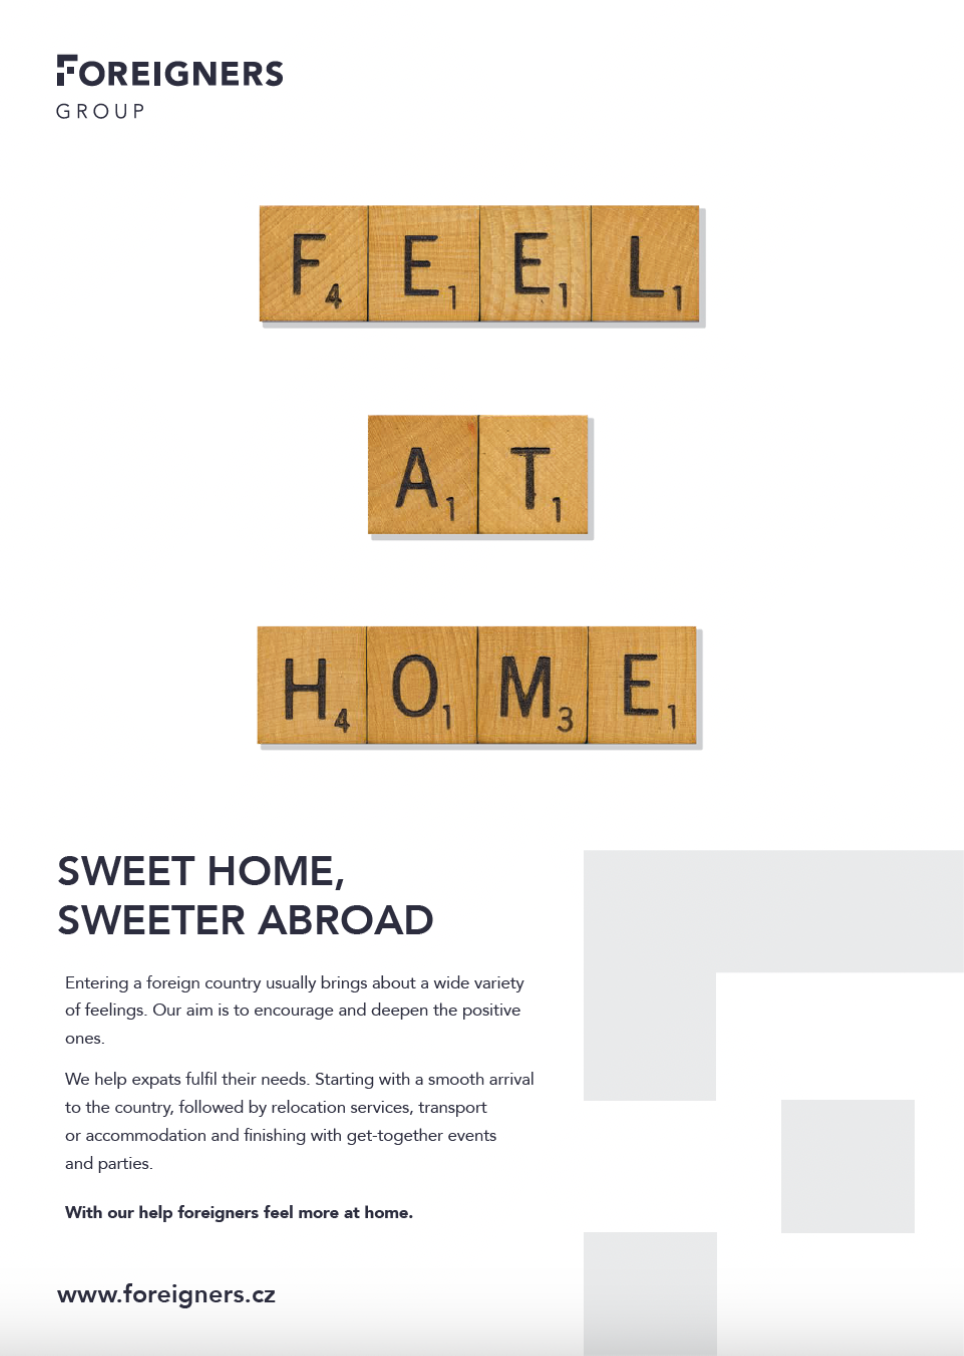 Sweet home, sweeter abroad